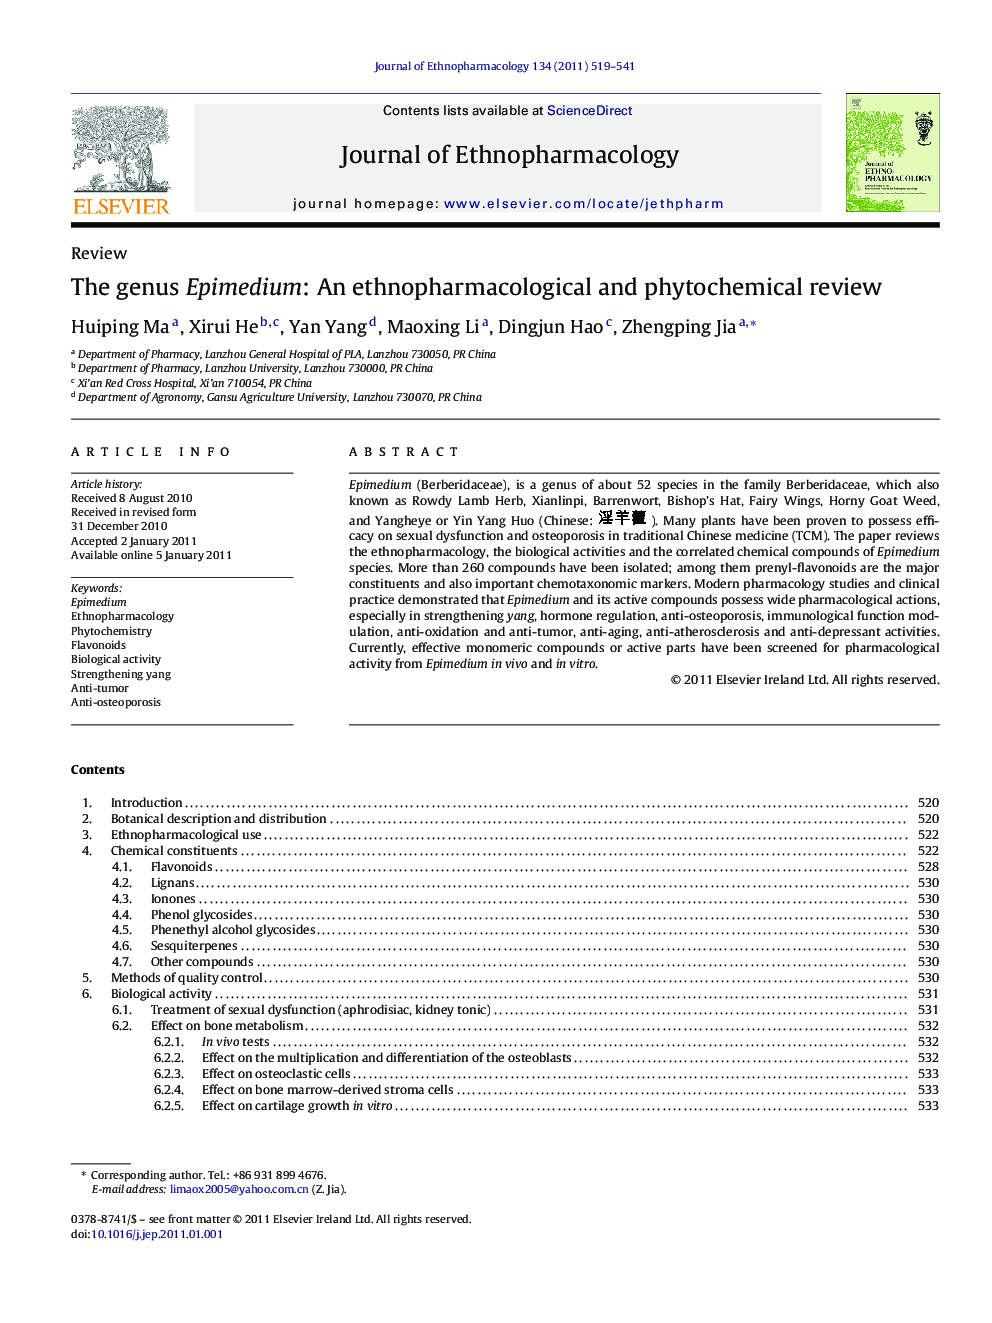 The genus Epimedium: An ethnopharmacological and phytochemical review